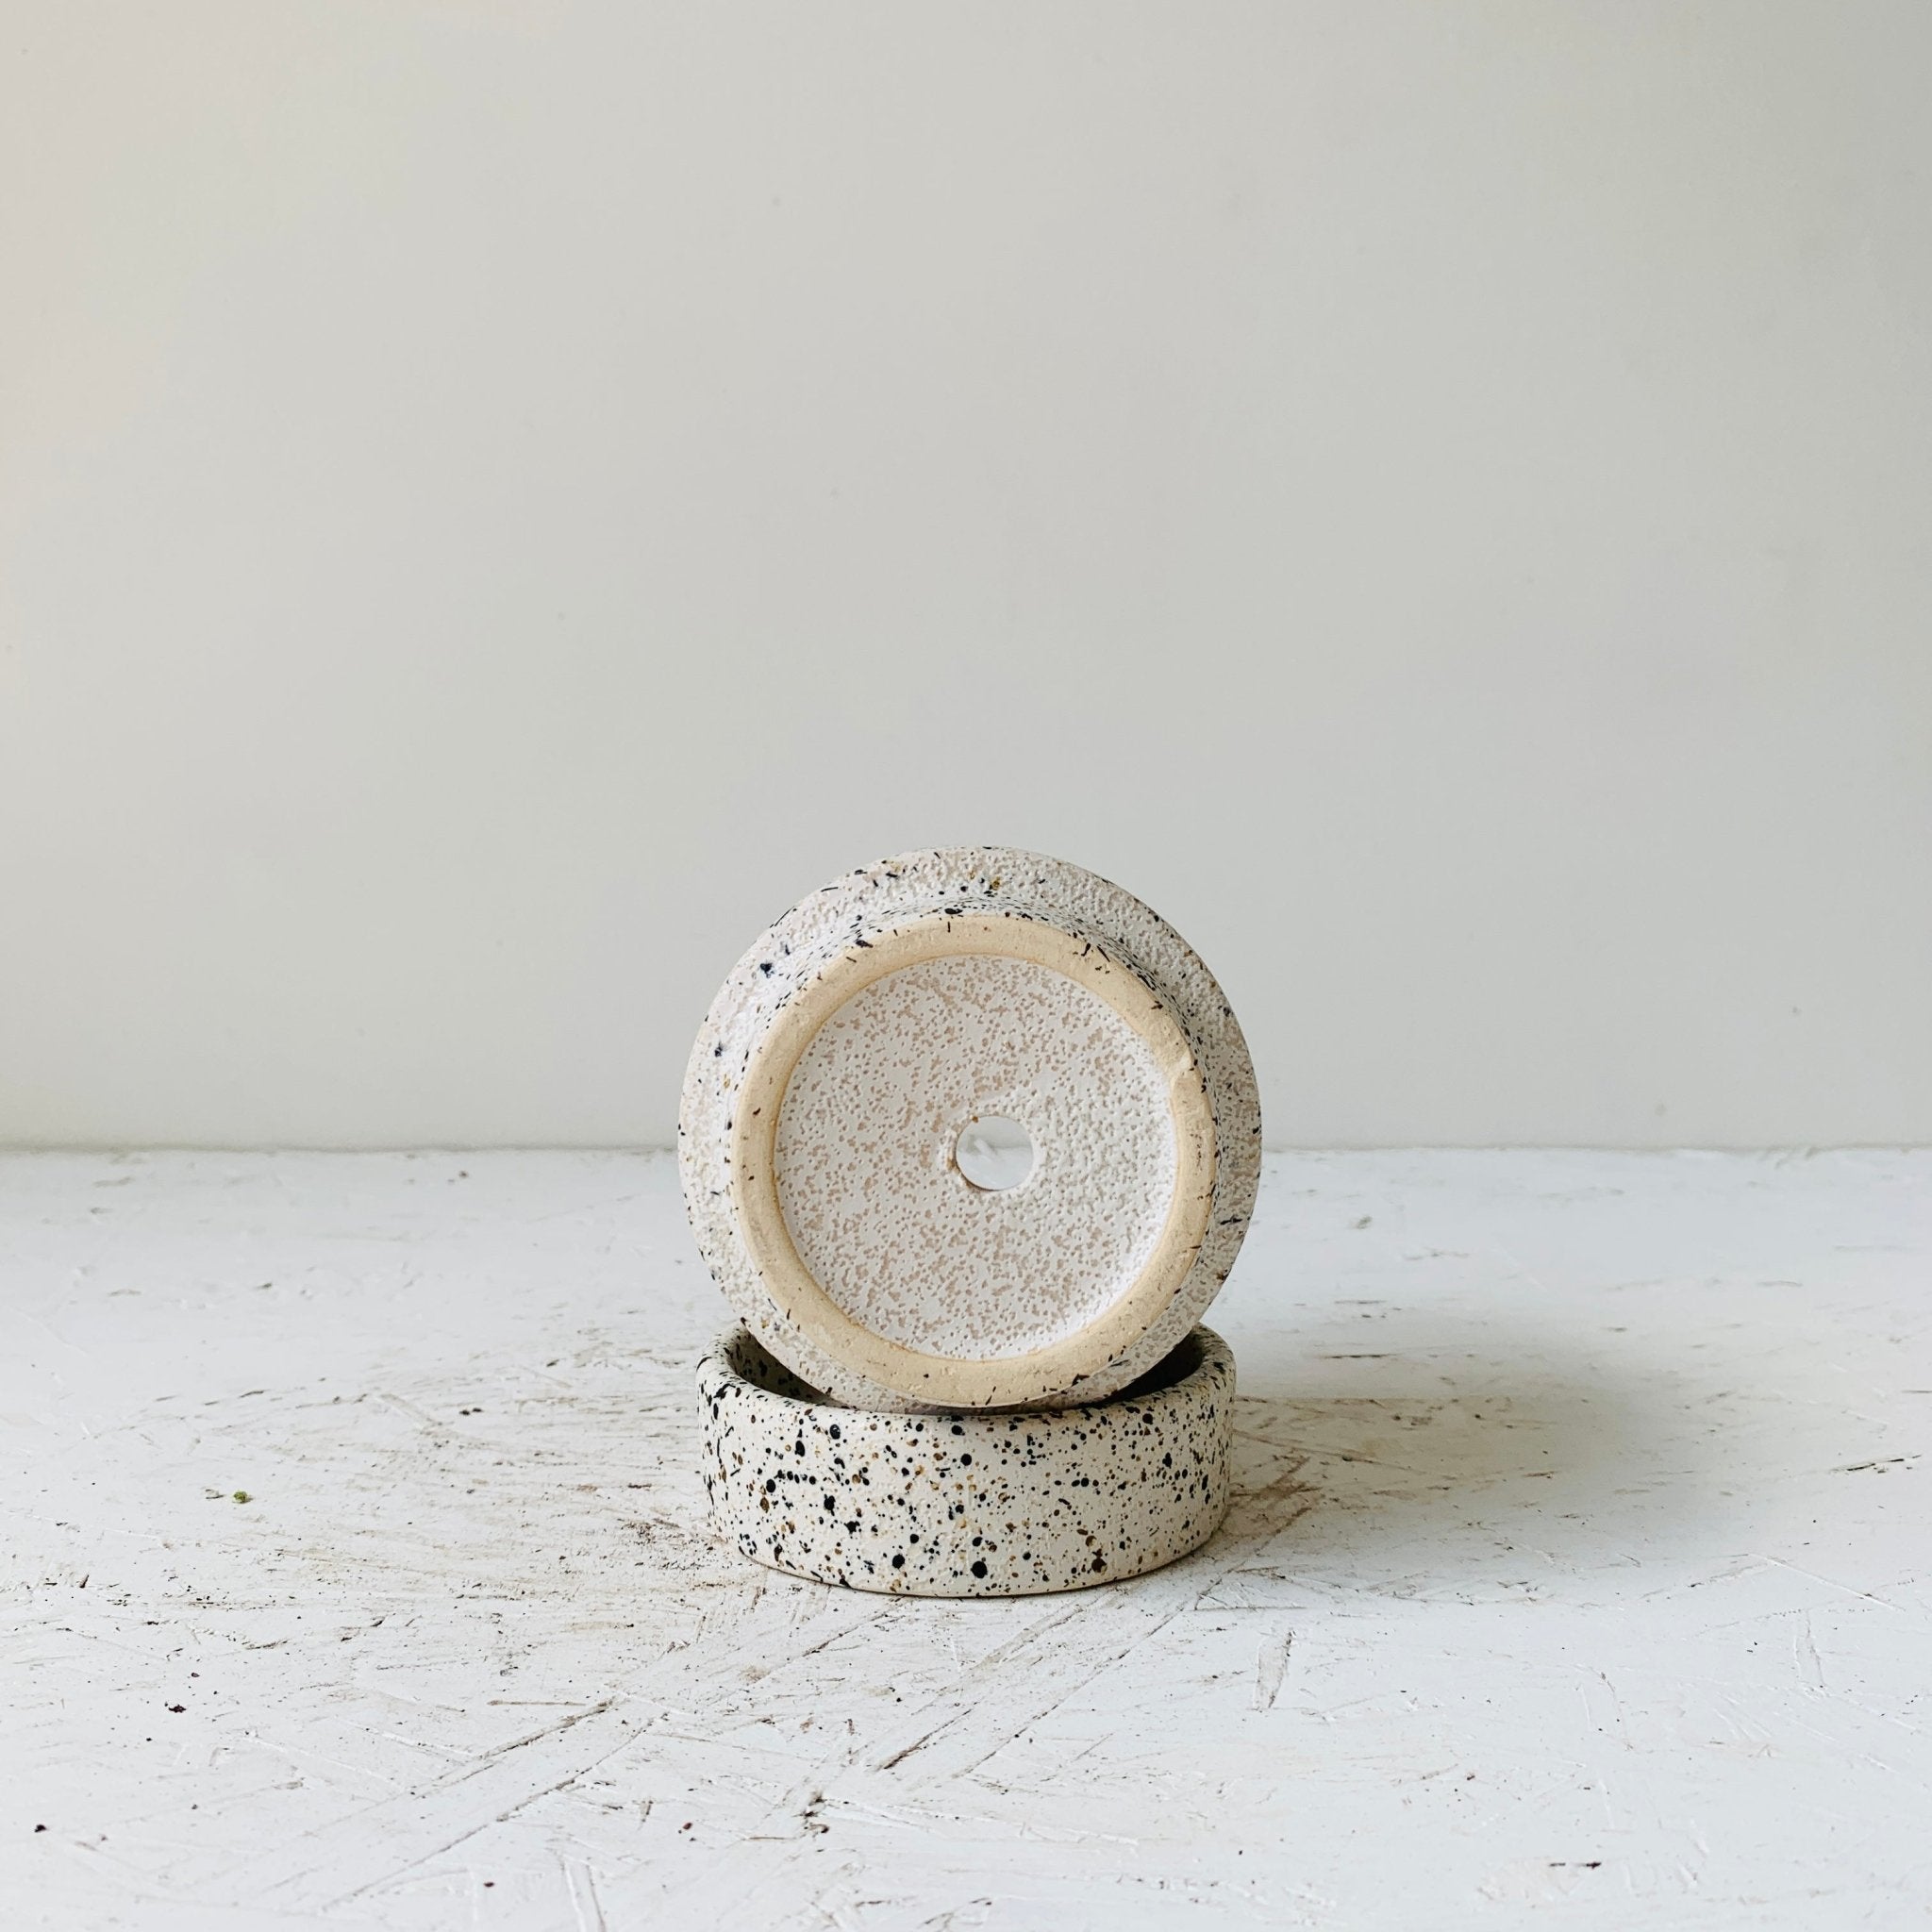 Speckled Clay Pot with drainage hole and saucer - MIKAFleur